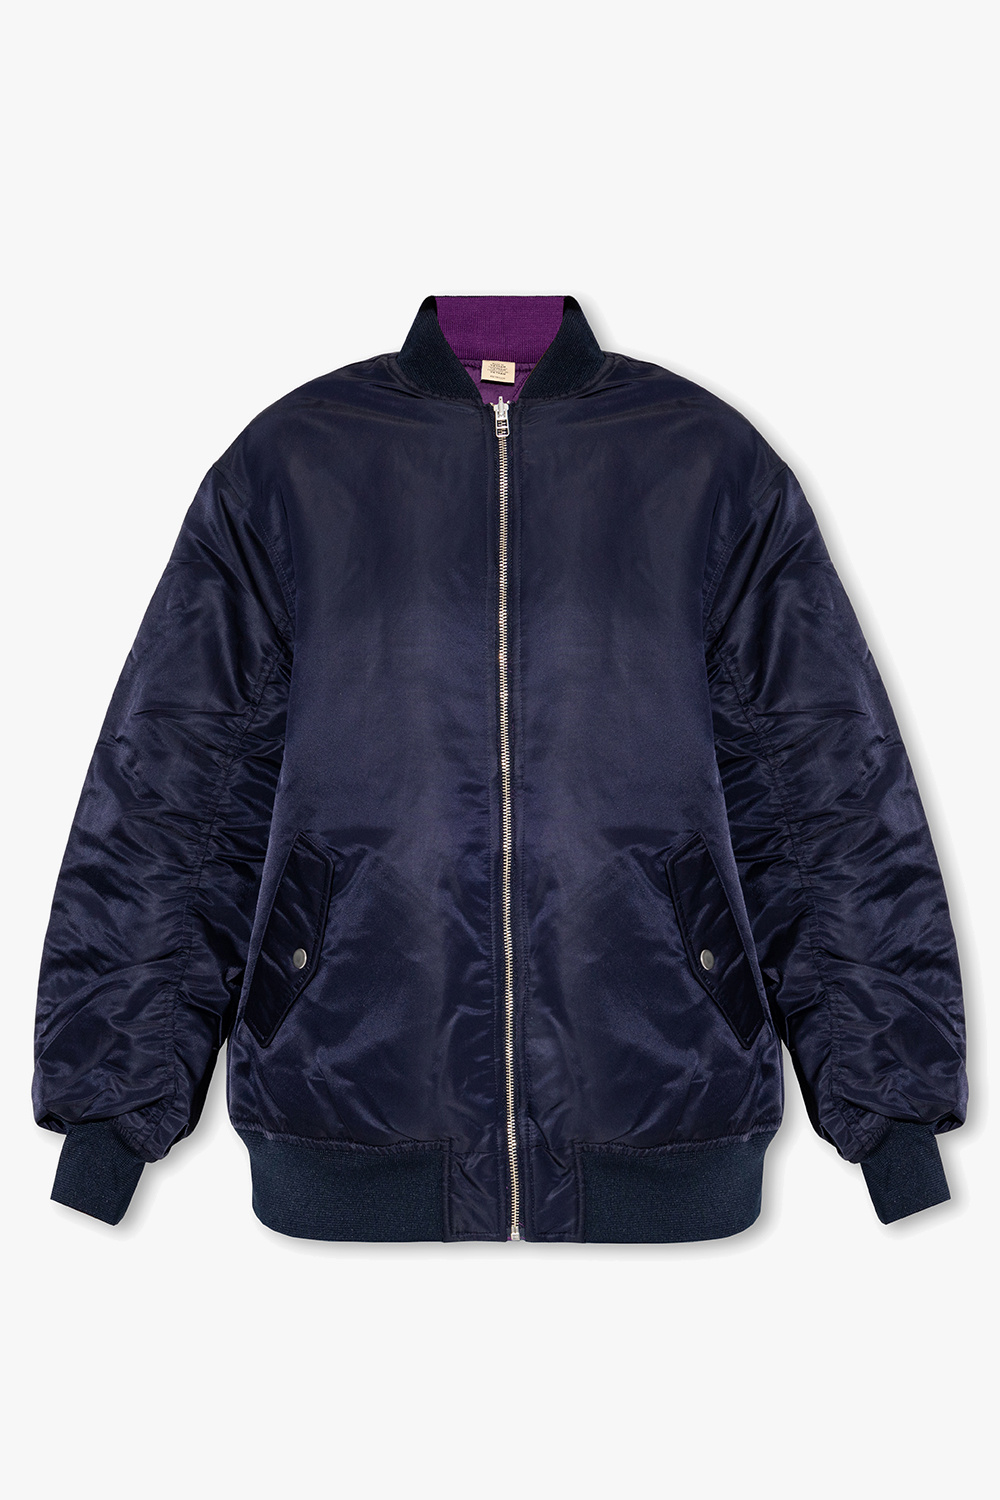 Levi's Bomber Inspire jacket ‘Performance’ collection